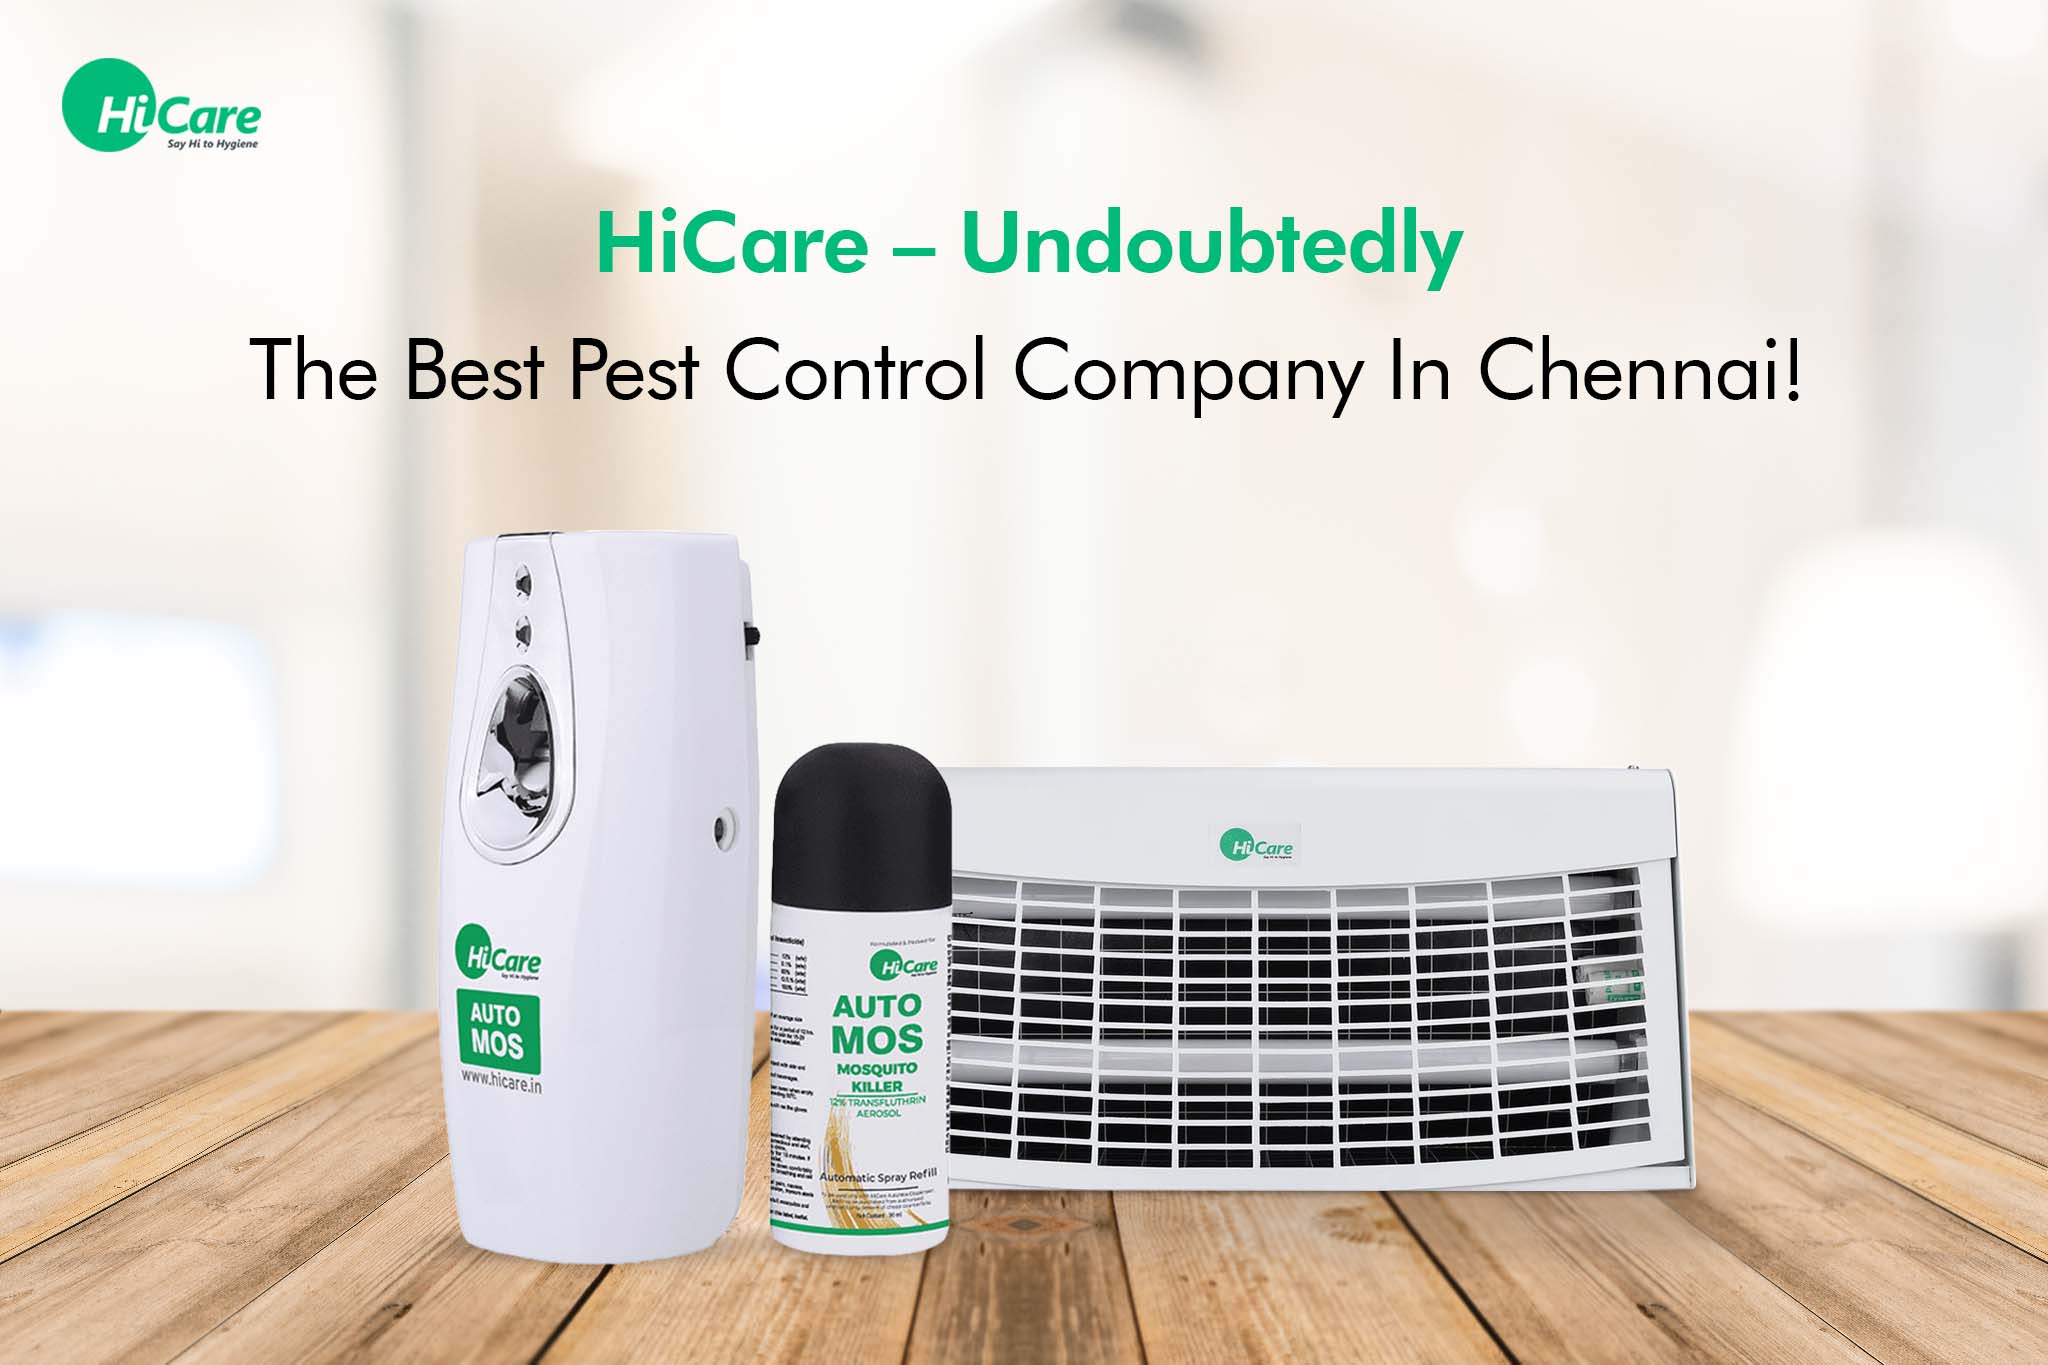 HiCare – Undoubtedly The Best Pest Control Company in Chennai!